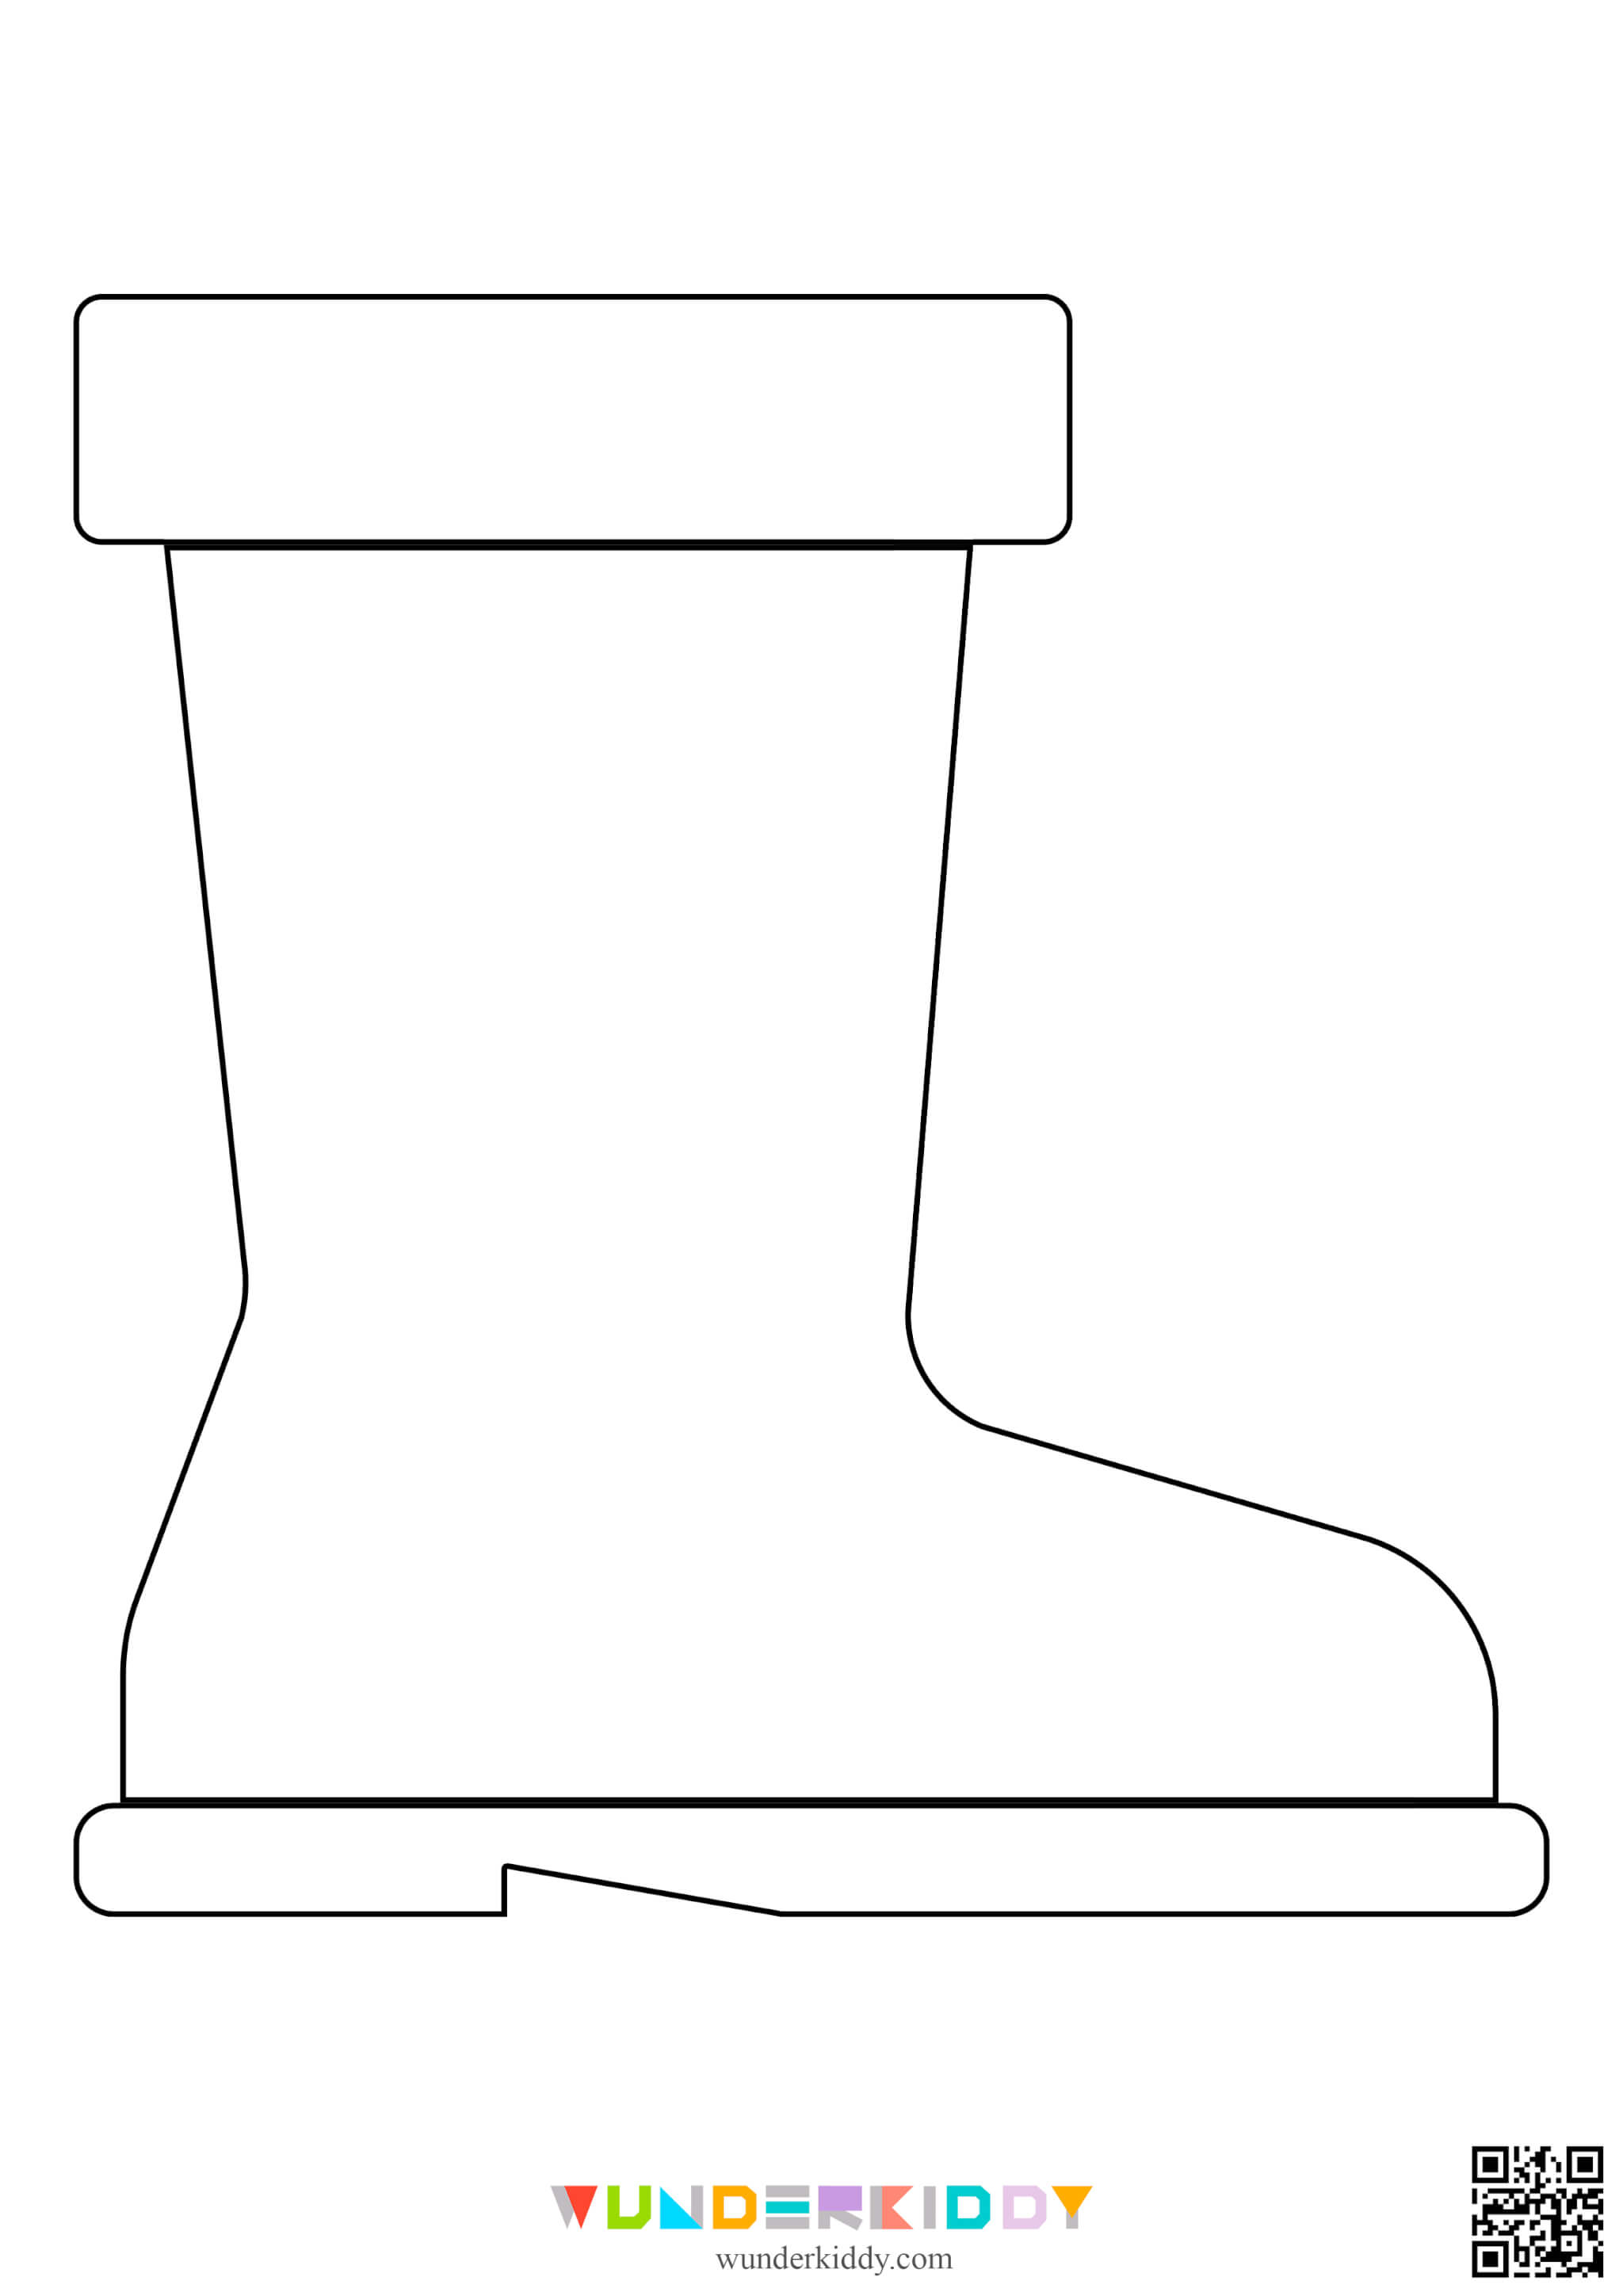 Boots Template - Image 4